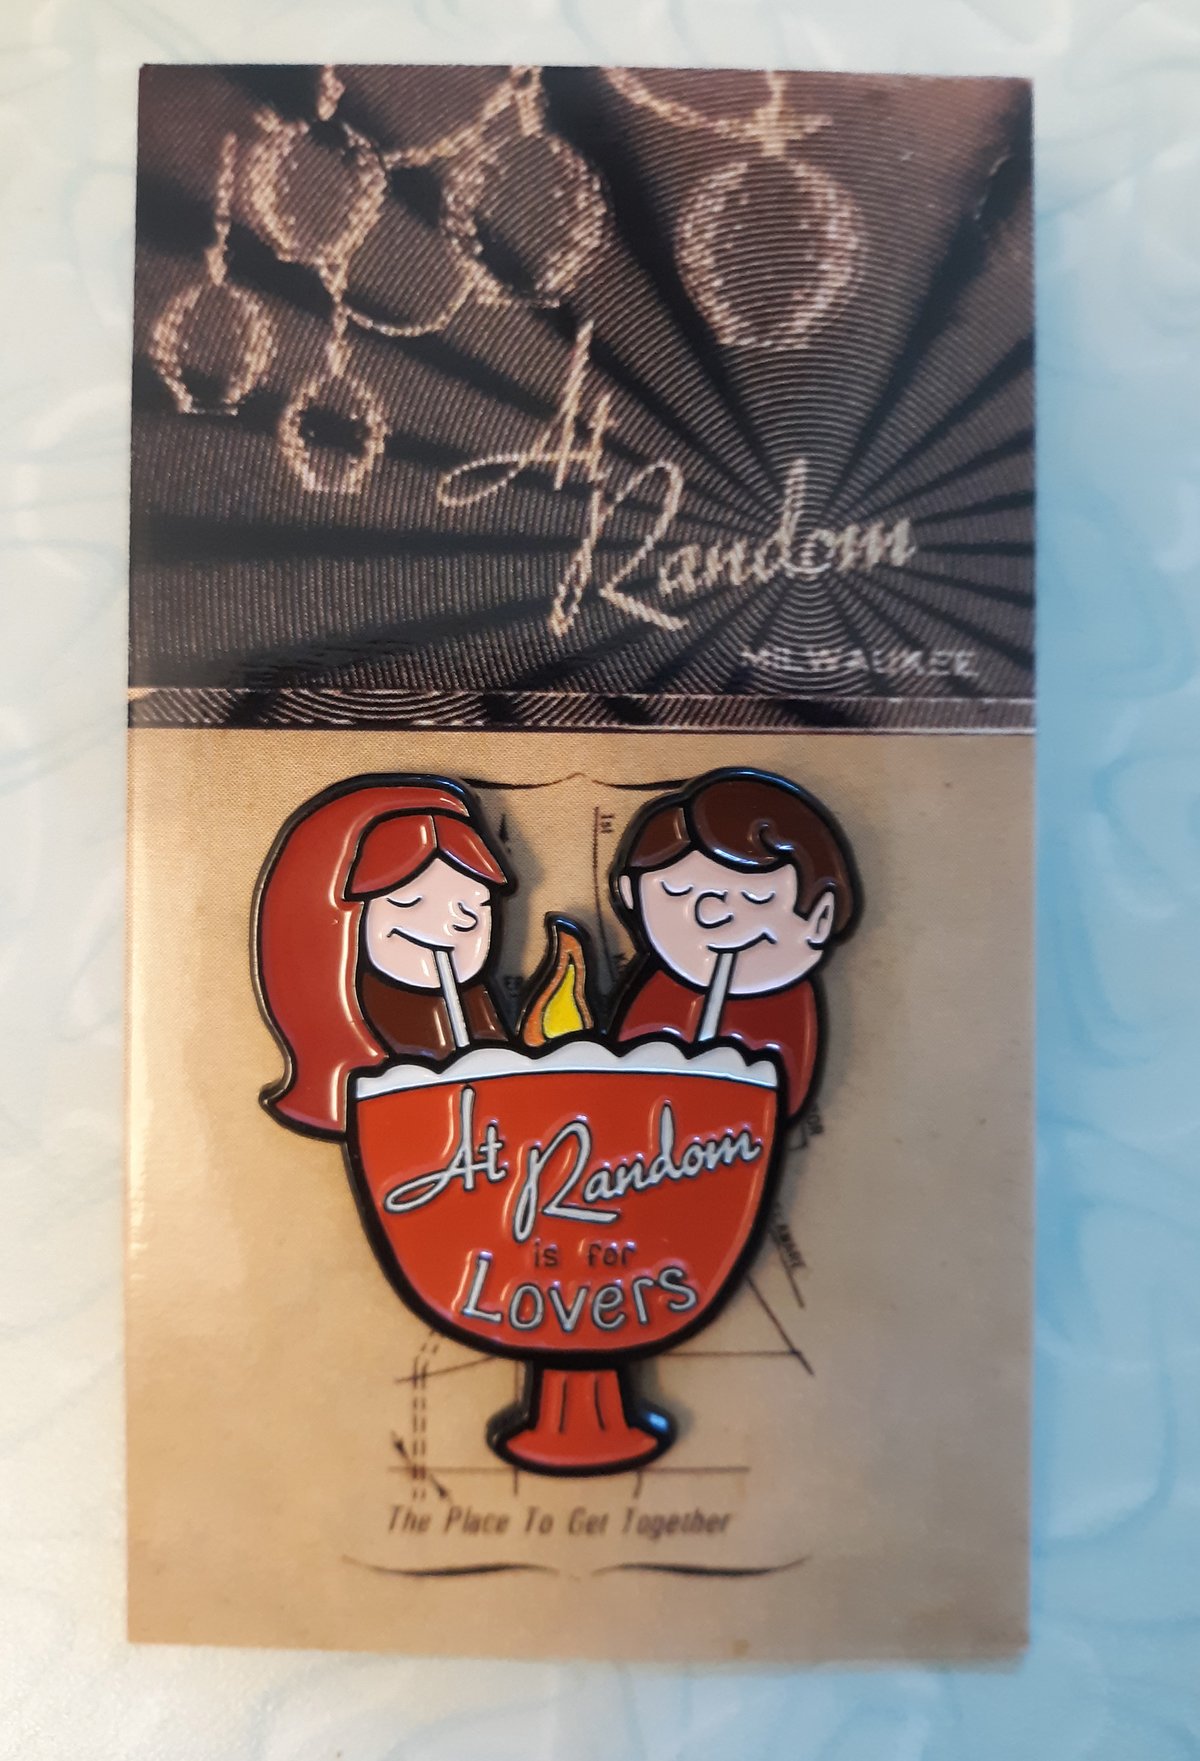 AT RANDOM IS FOR LOVERS Milwaukee Tiki Love Bowl RED 1.75" Soft Enamel Pin w/ Glowing Flame